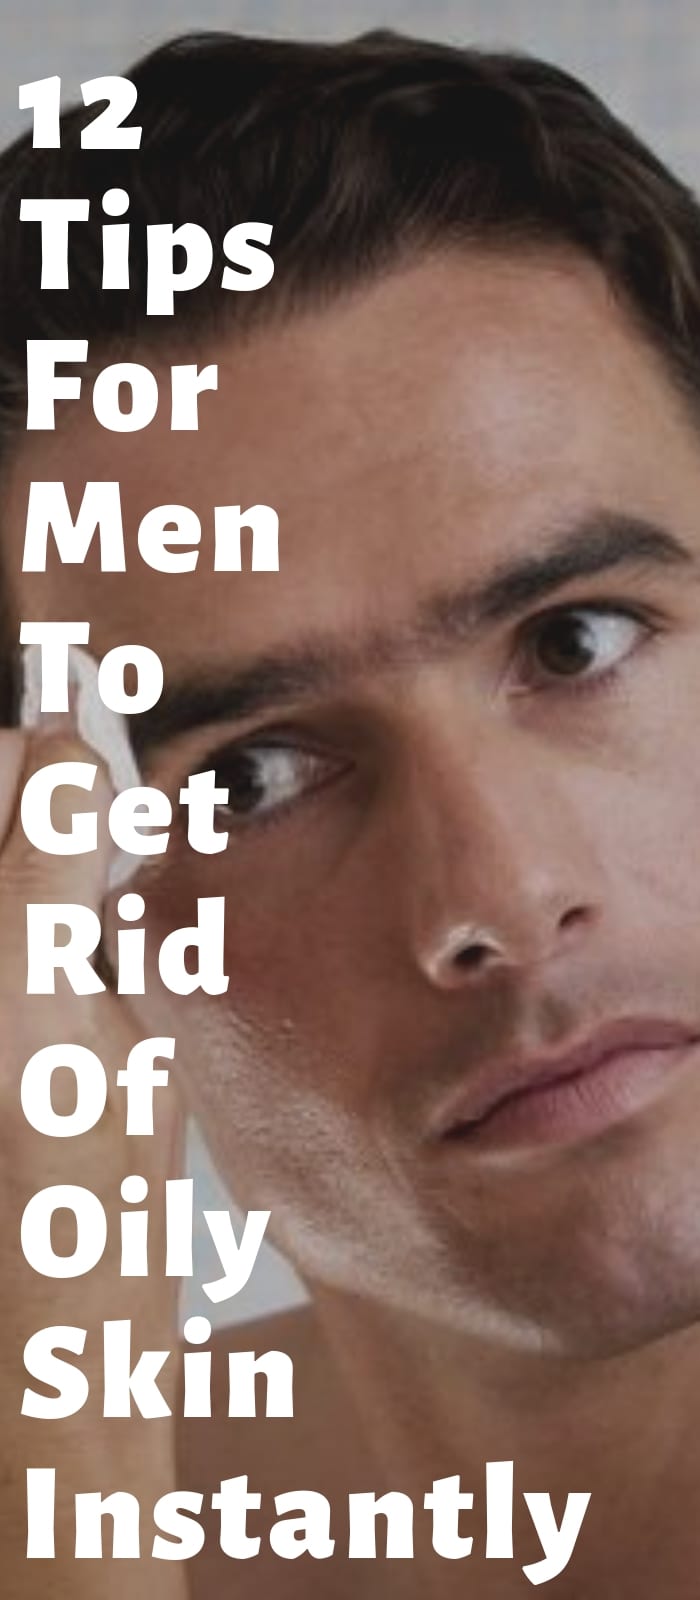 12 Tips For Men To Get Rid Of Oily Skin Instantly